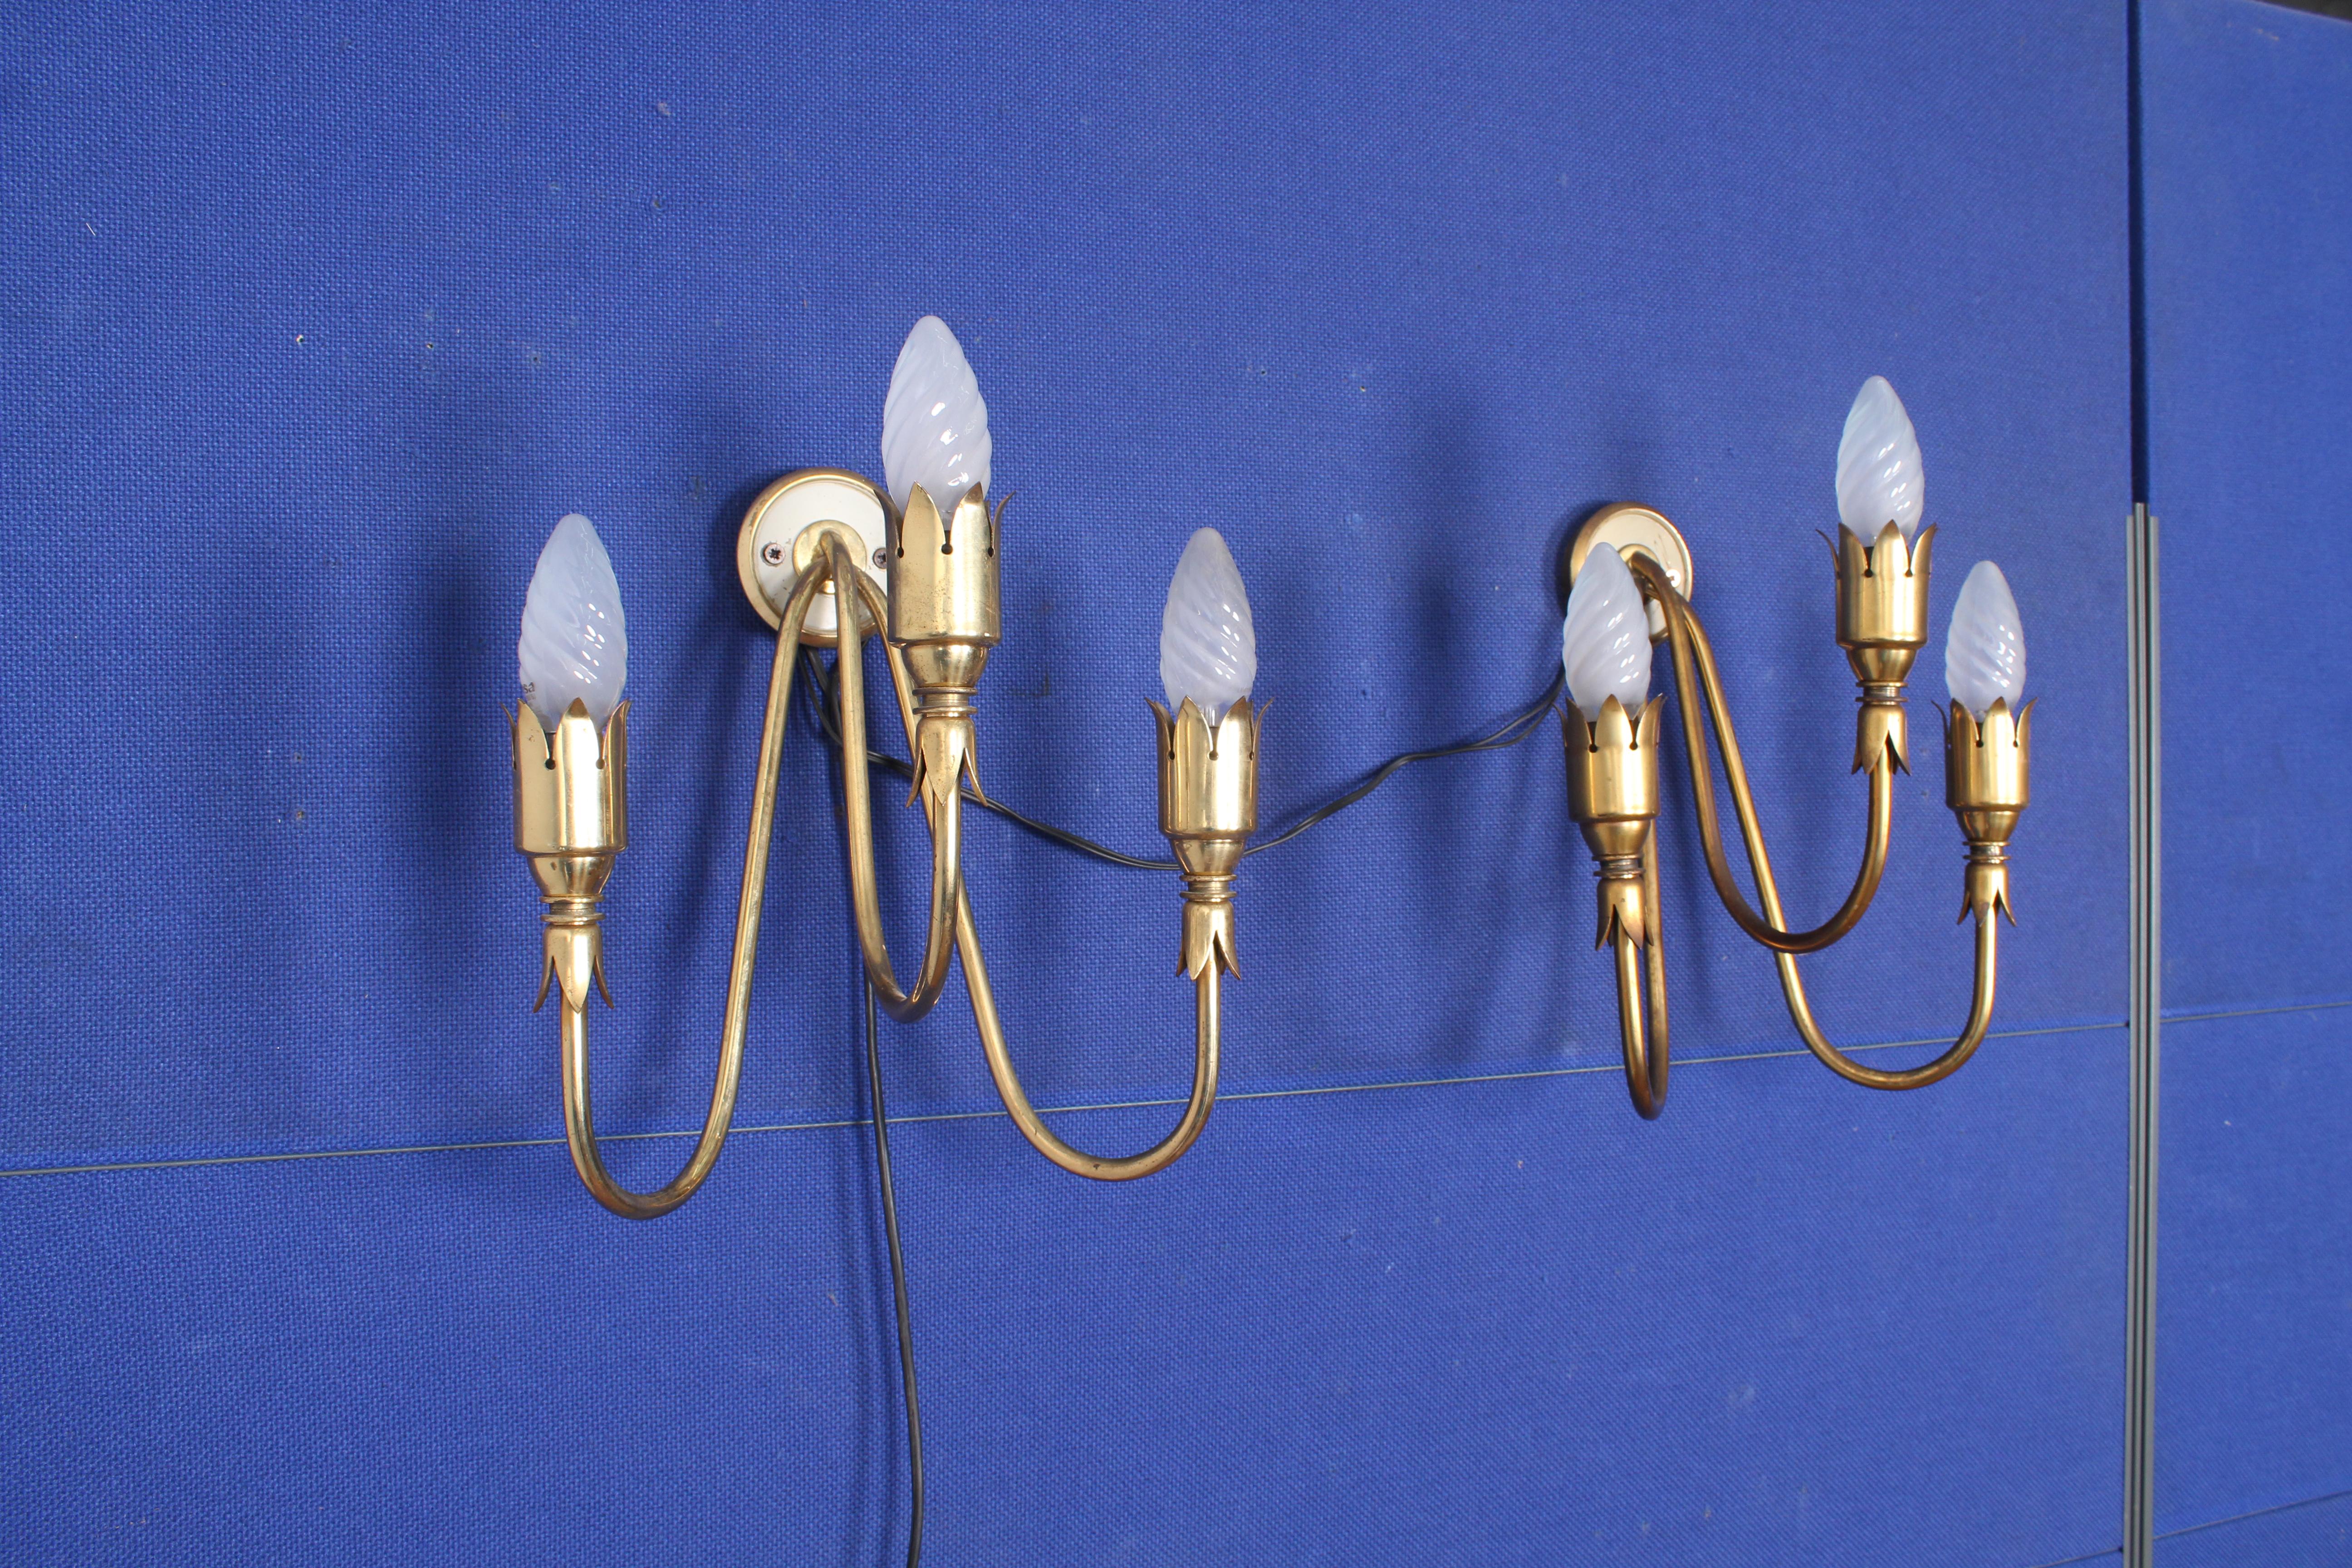 Pair of Italian Sconces  of Arredoluce. Mounted of brass frames with original patina. Three light sockets per sconce.
Wear consistent with age and use.